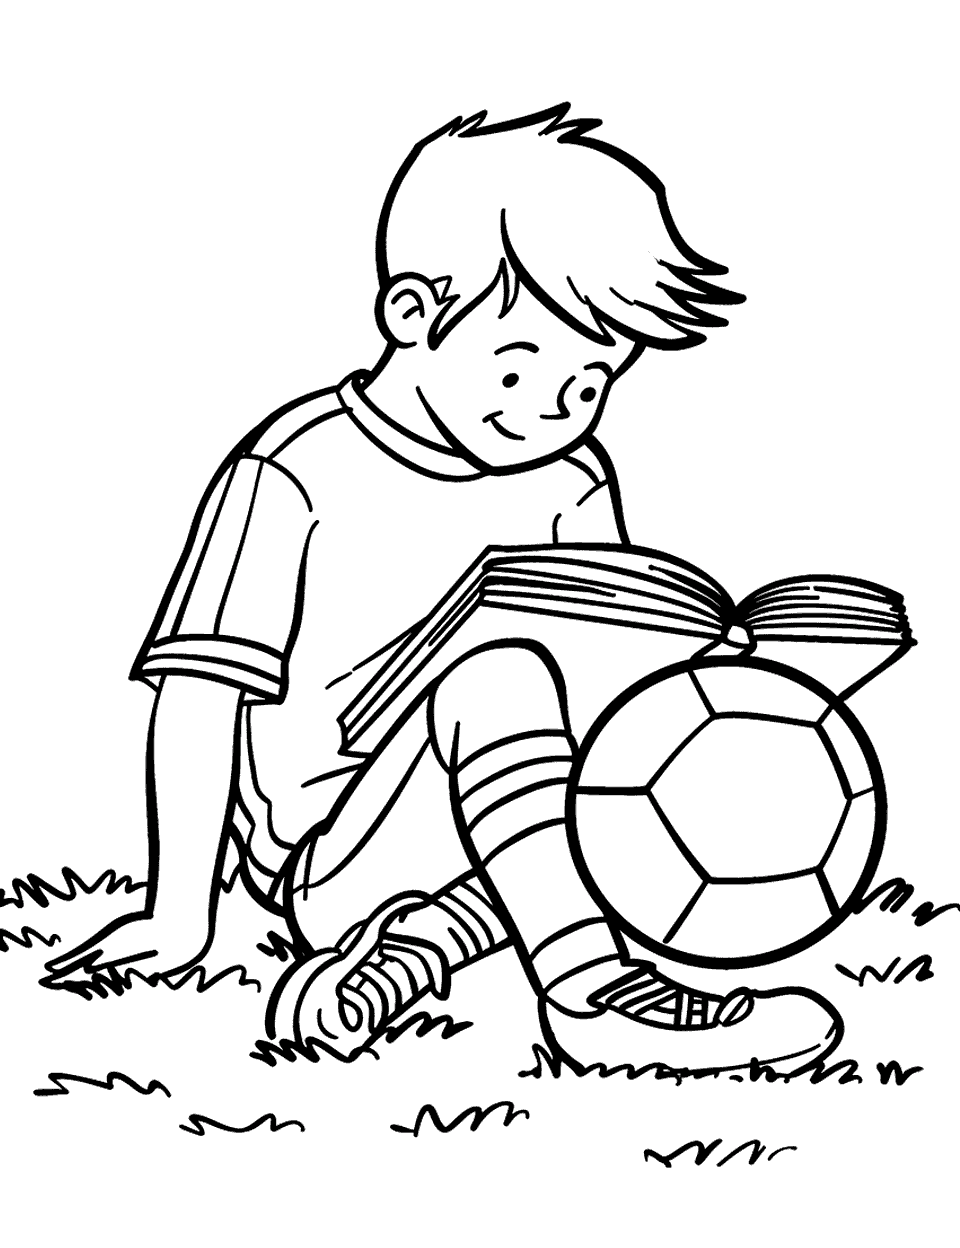 Studying Soccer Plays Coloring Page - A kid sitting on the grass, studying a book of soccer plays and strategies.